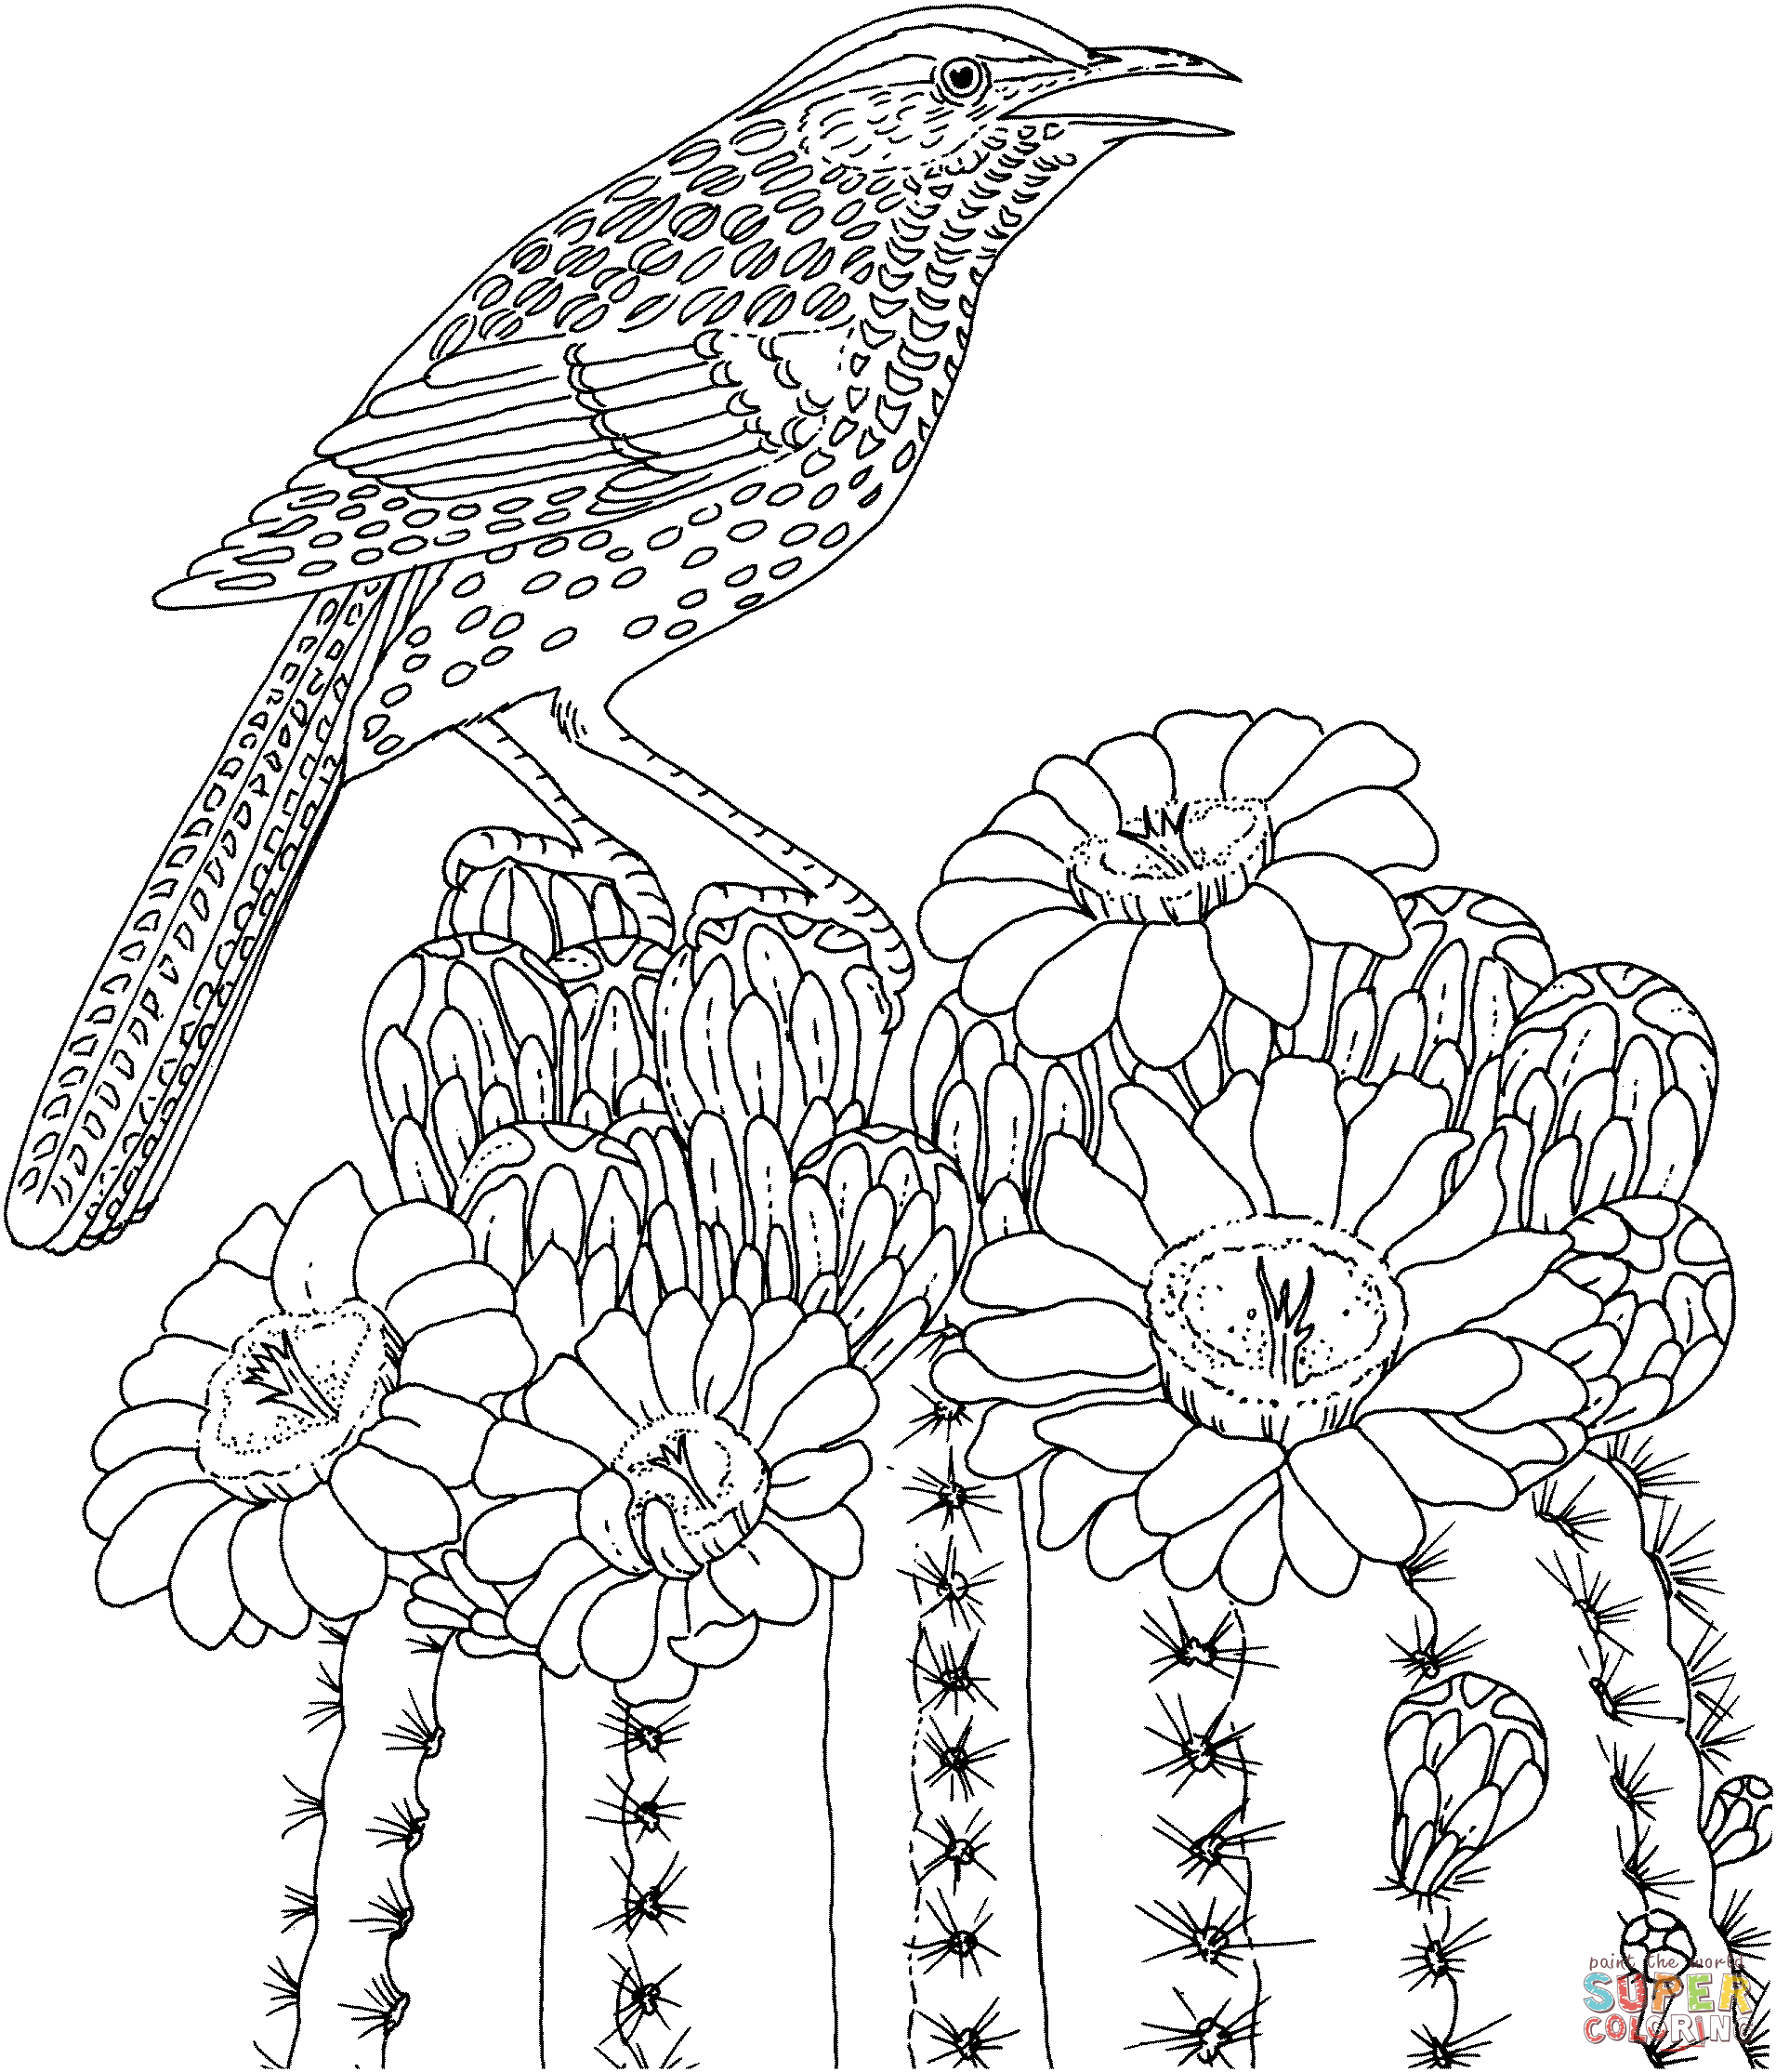 Saguaro Cactus Blossoms coloring page | Free Printable Coloring Pages